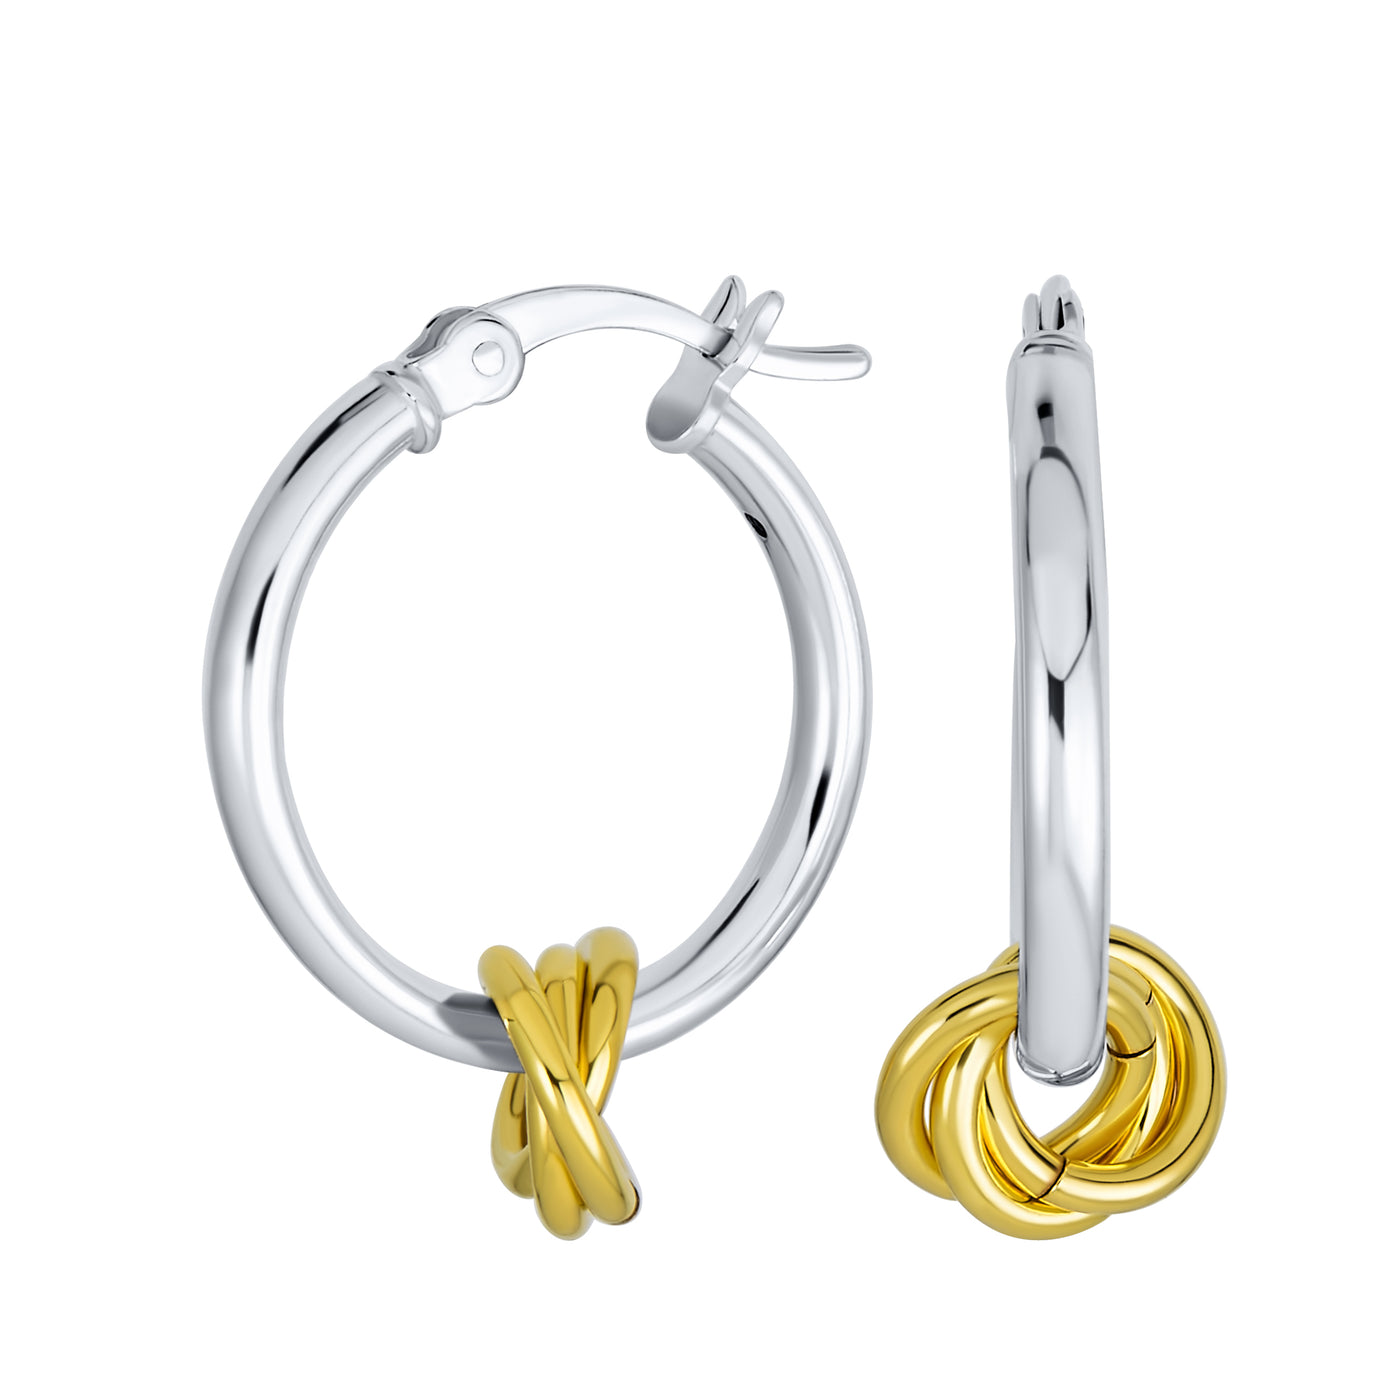 Two Tone Love Knot Hoop Earrings Gold Plated .925Sterling Silver 1"